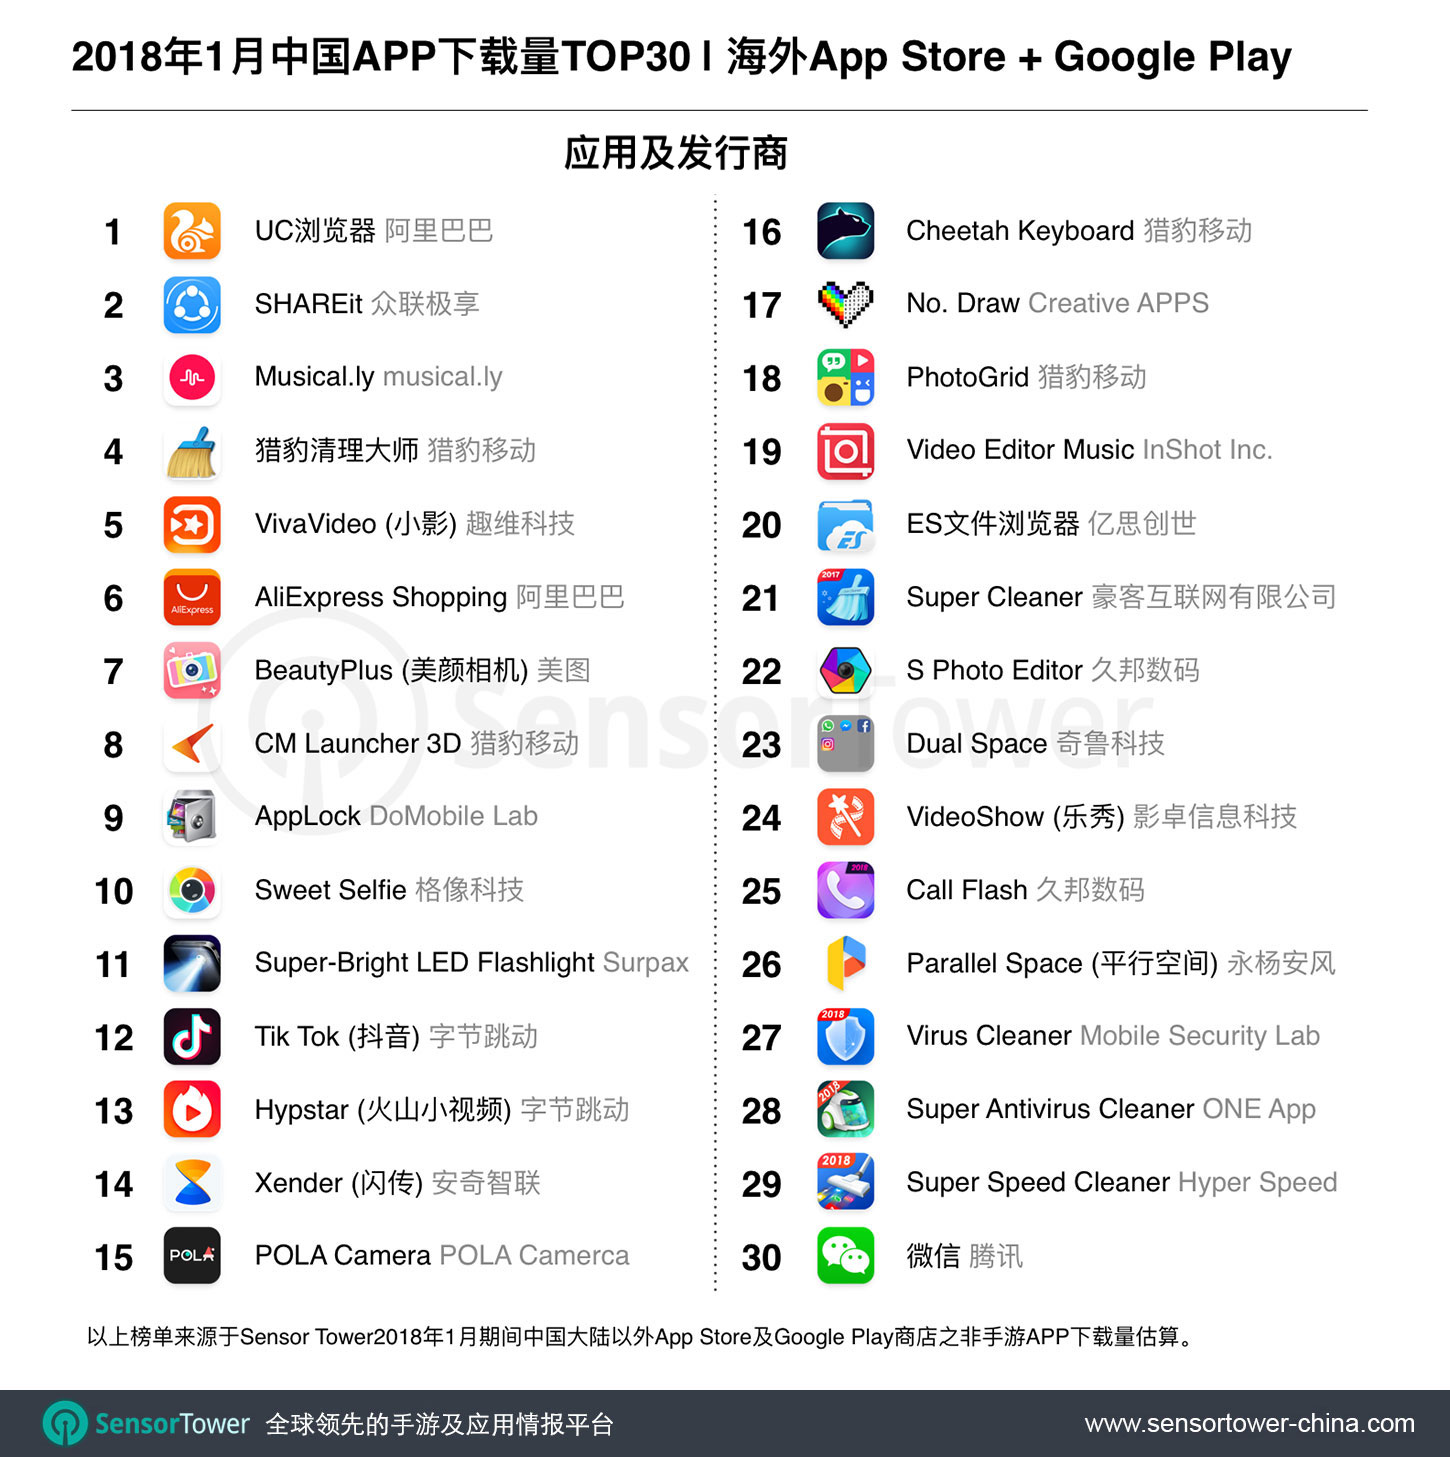 Jan 2018 Top 30 Most Downloaded Chinese-Made Non-Games Apps Outside China